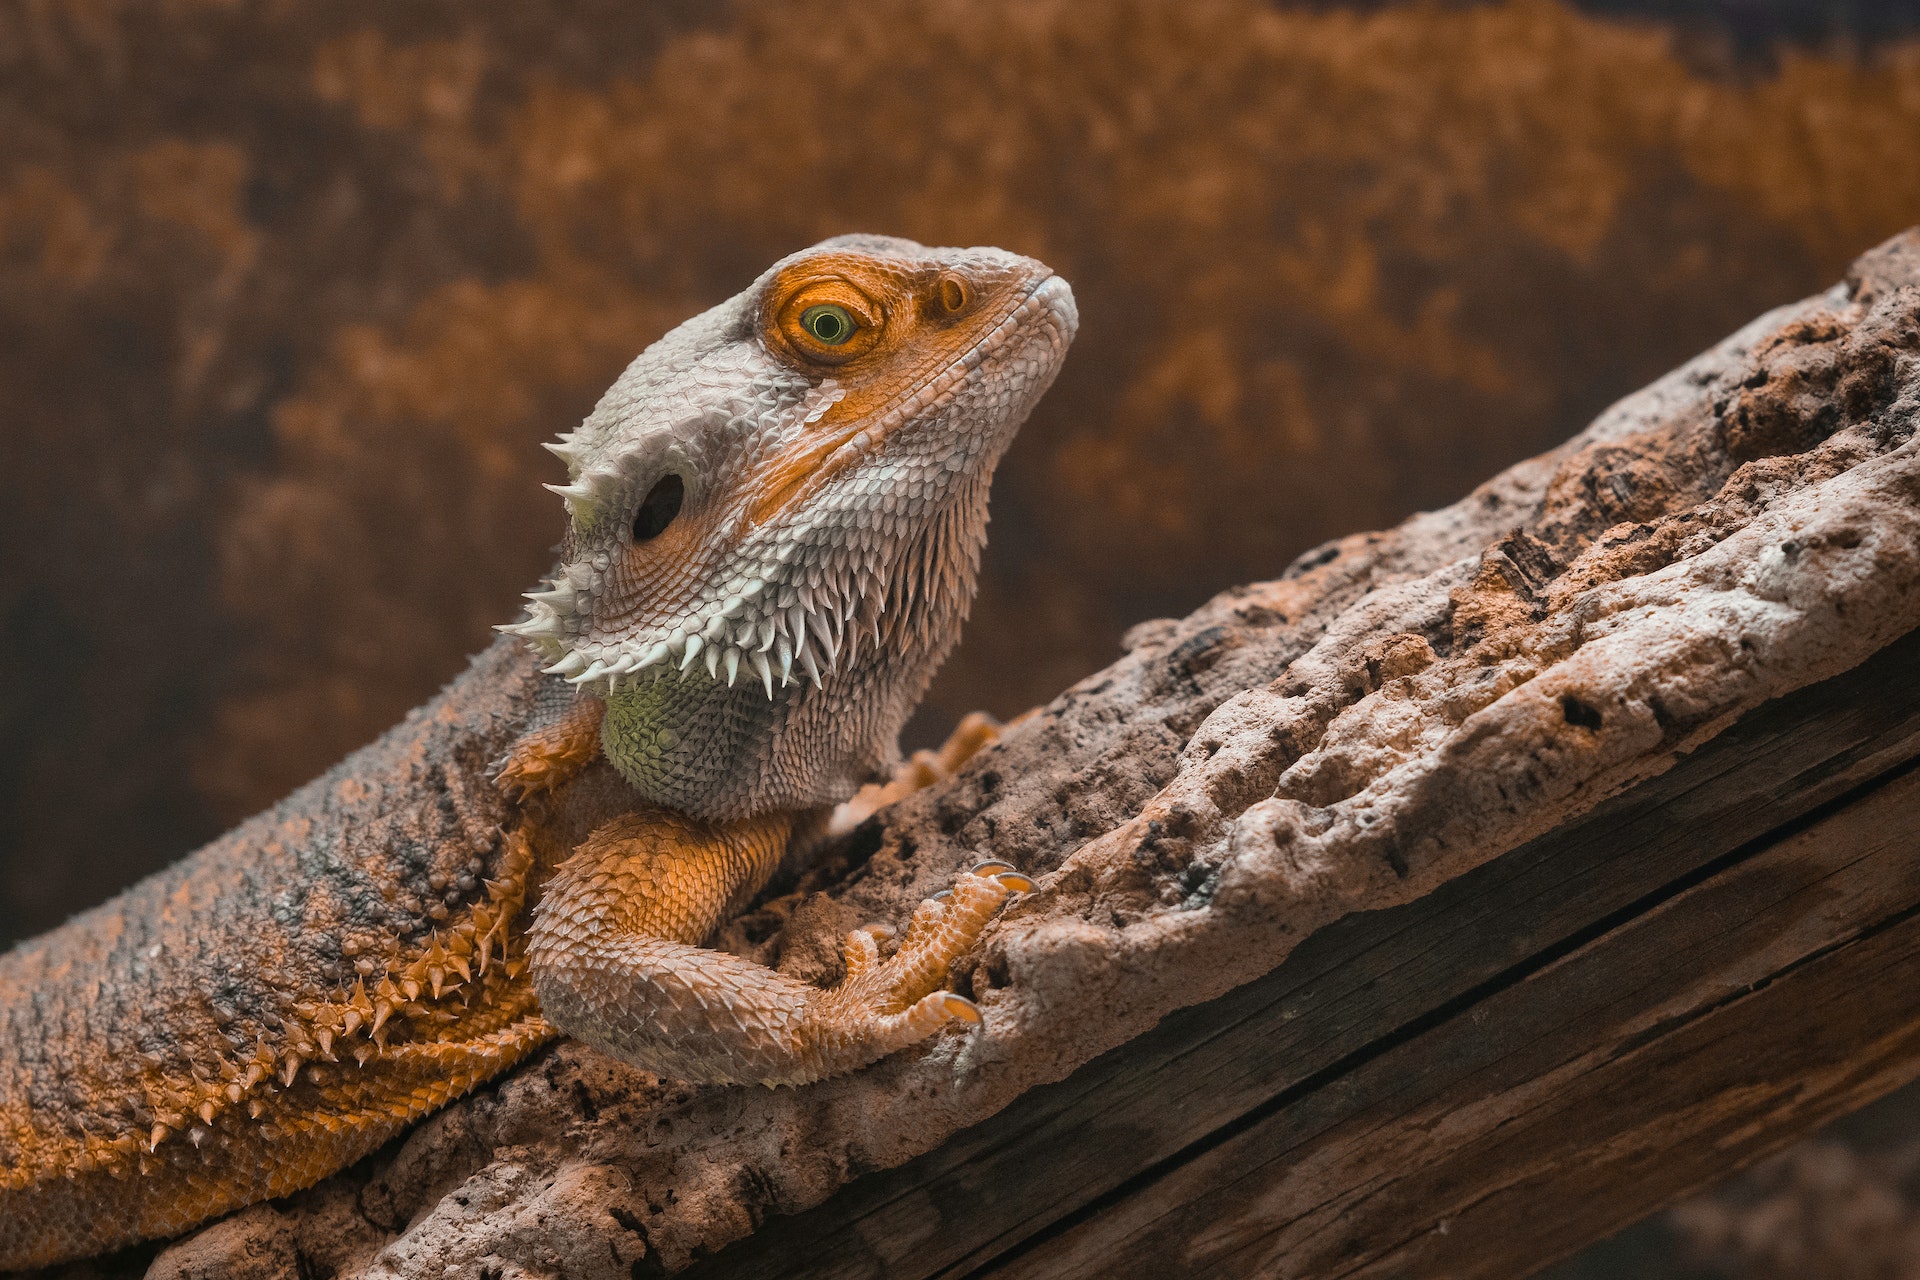 Common Bearded Dragon Health Issues and How to Treat Them